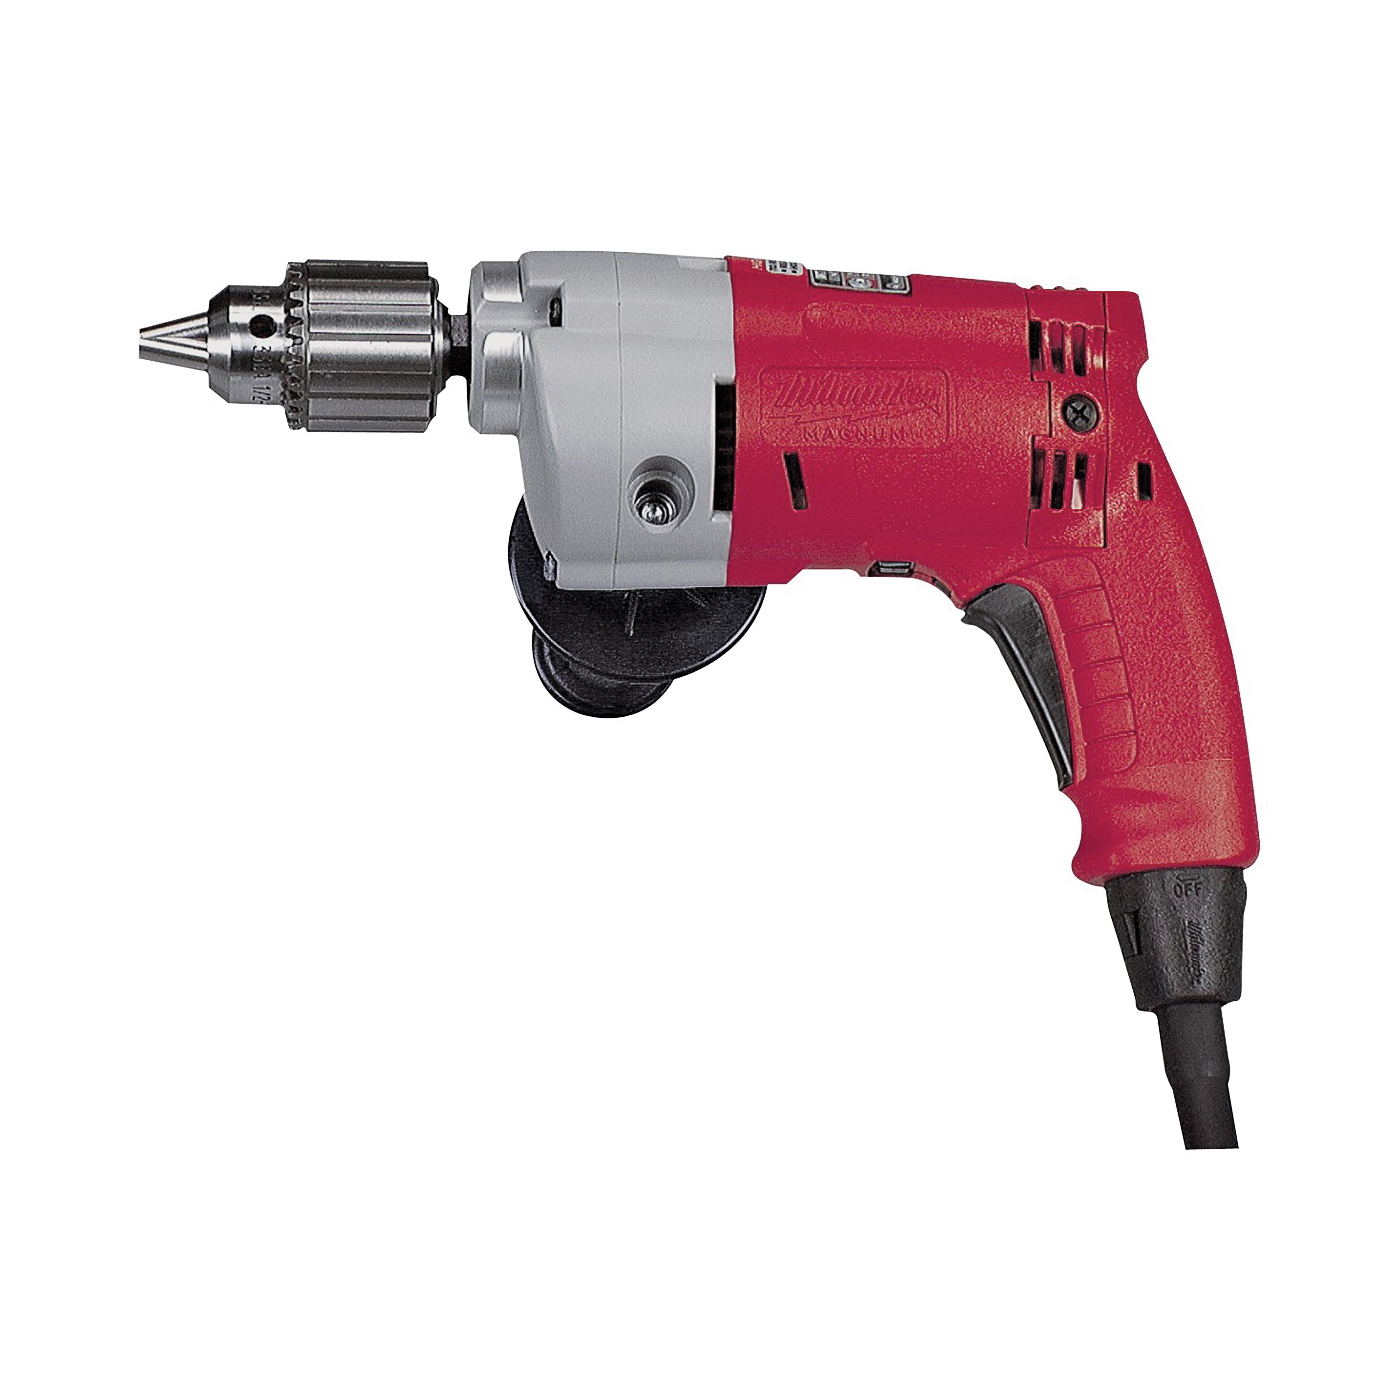 Buy Milwaukee 0234-6 Electric Drill, 5.5 A, 1/2 in Chuck, Keyed Chuck, ft  L Cord Red